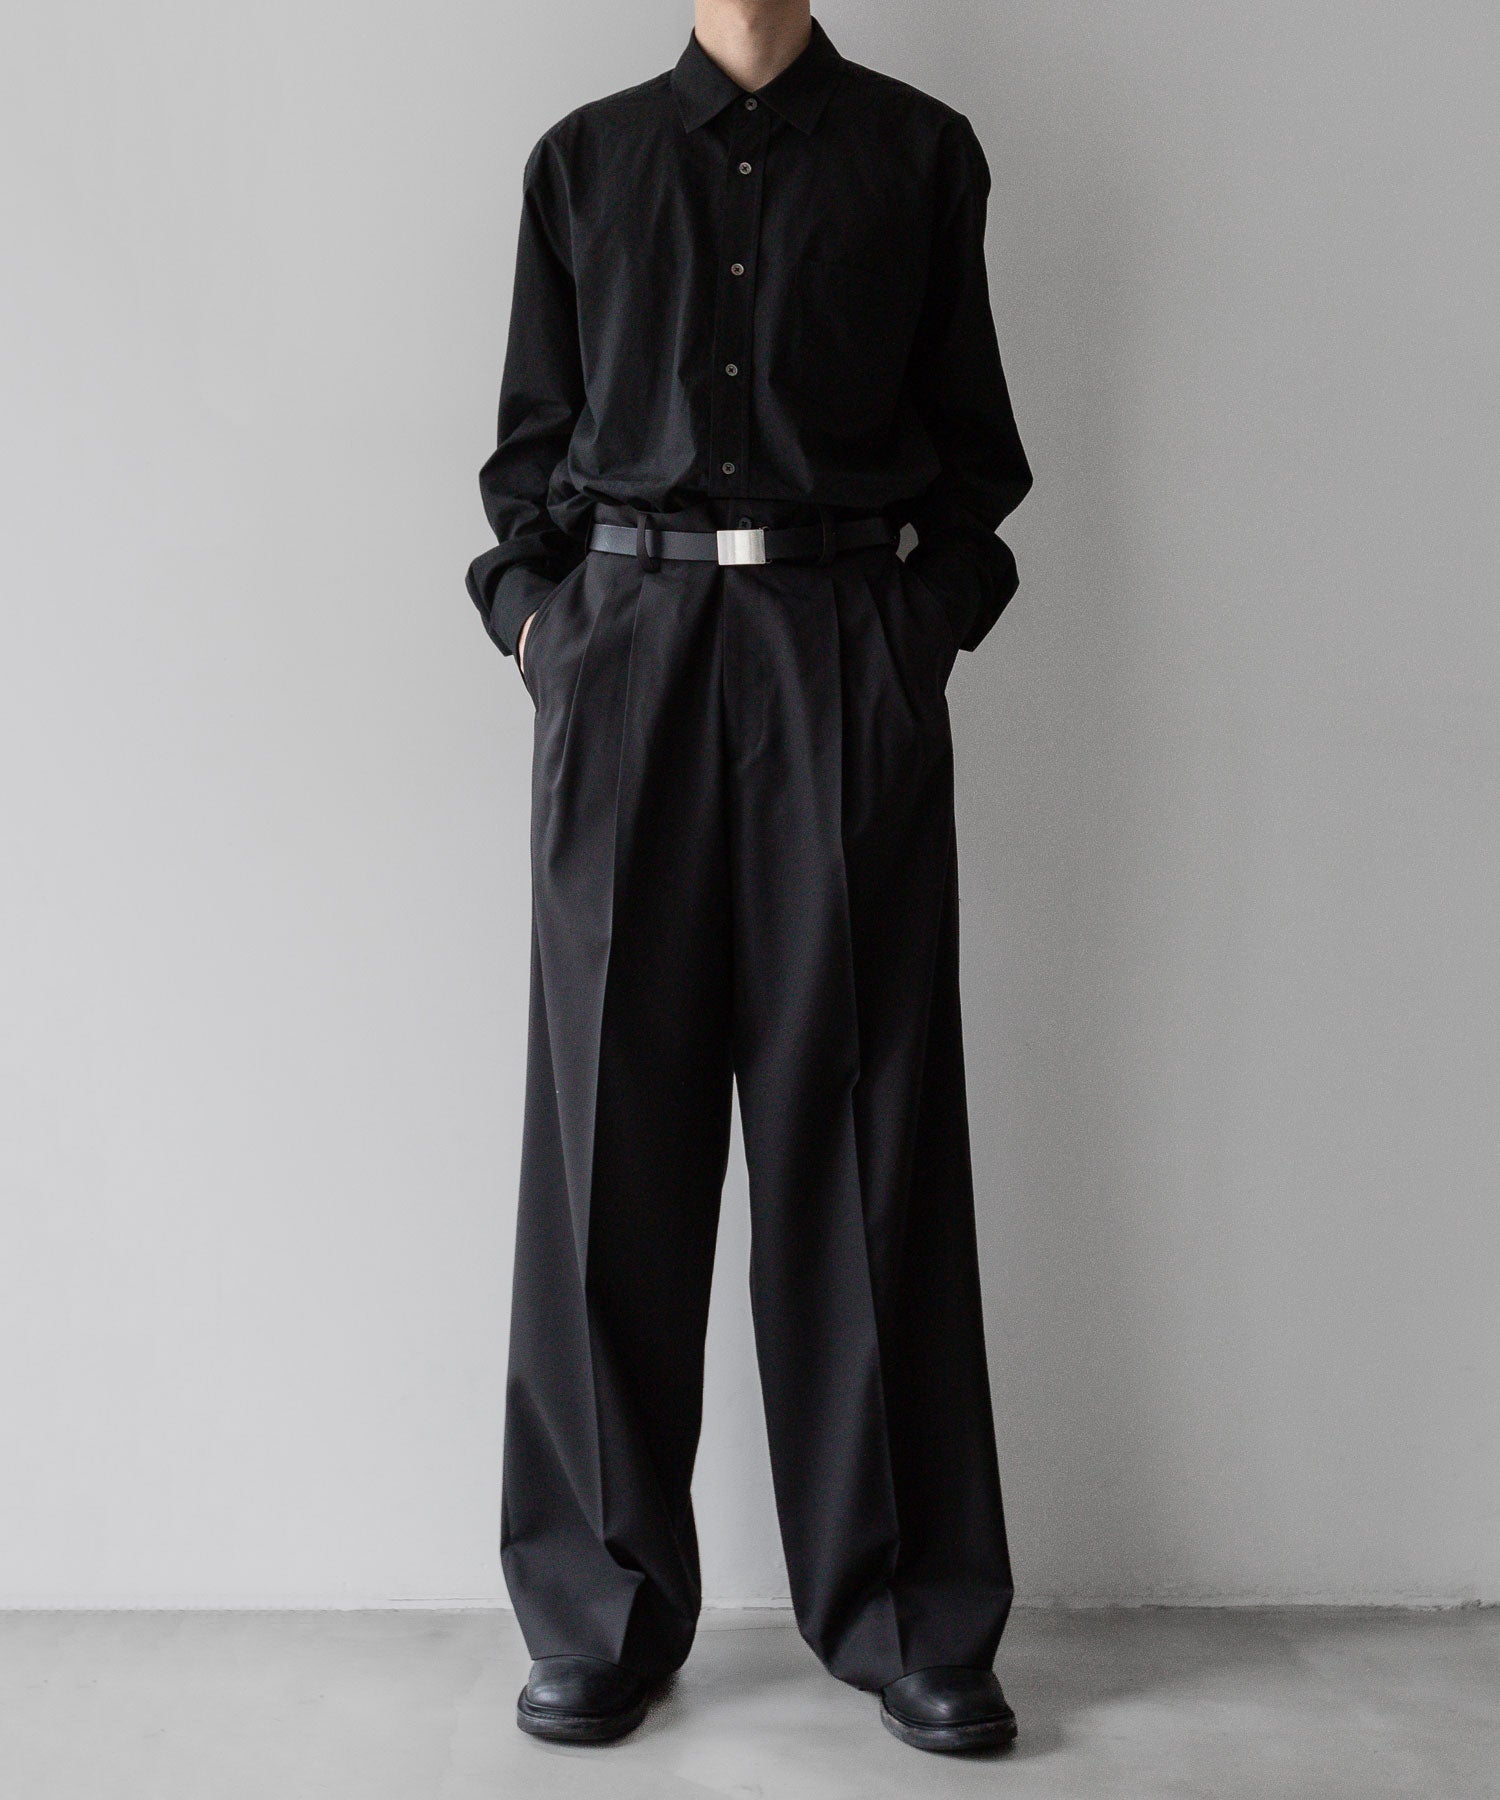 stein extra wide trousers darkcharcoal Mダークチャコール - スラックス